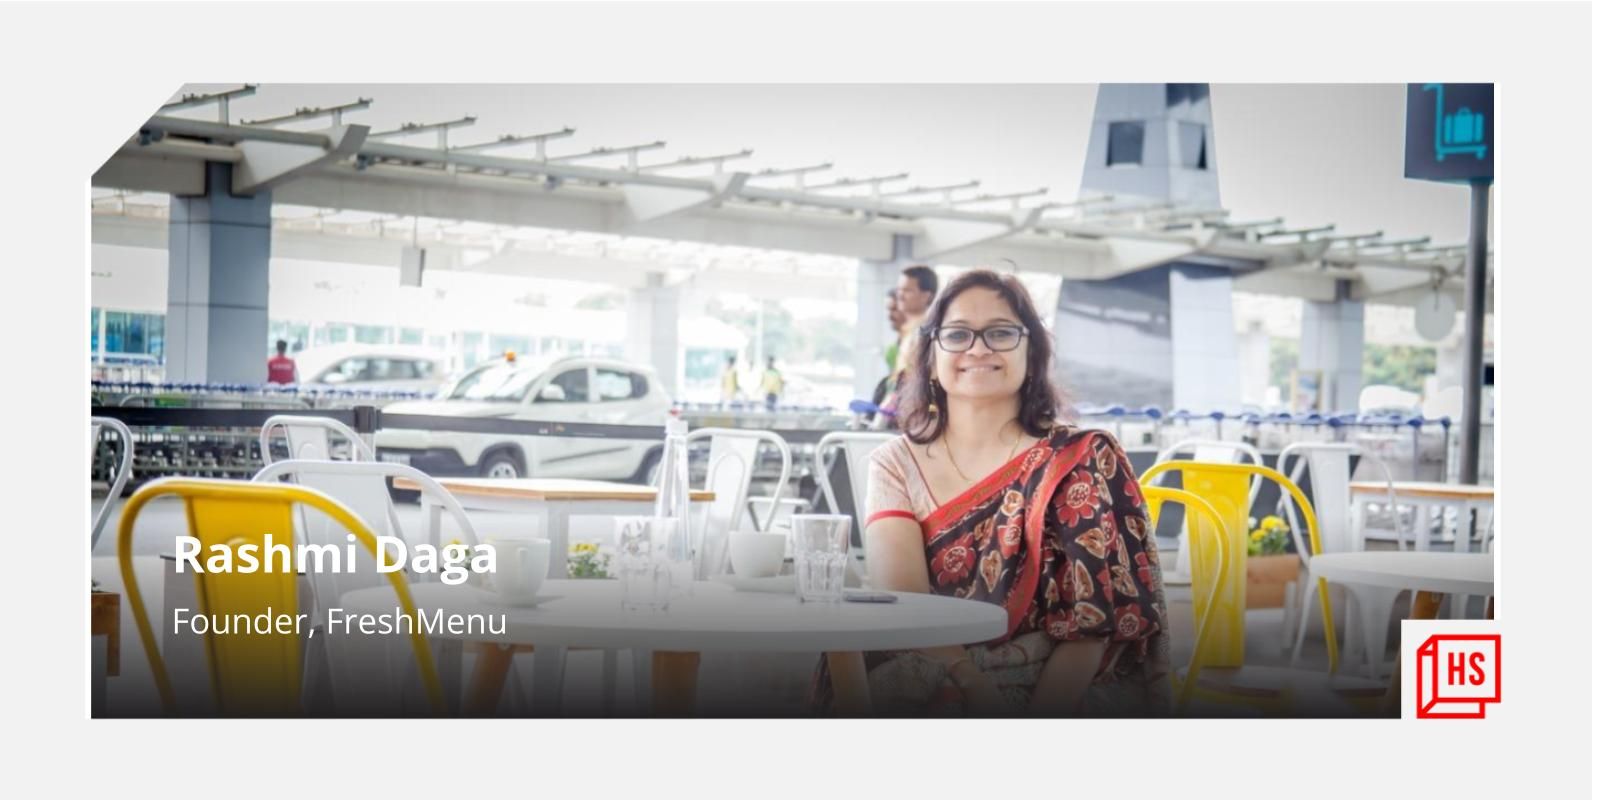 [HS Exclusive] How FreshMenu went from nearly shutting down to raising Rs 50 Cr and getting back on its feet stronger than ever

